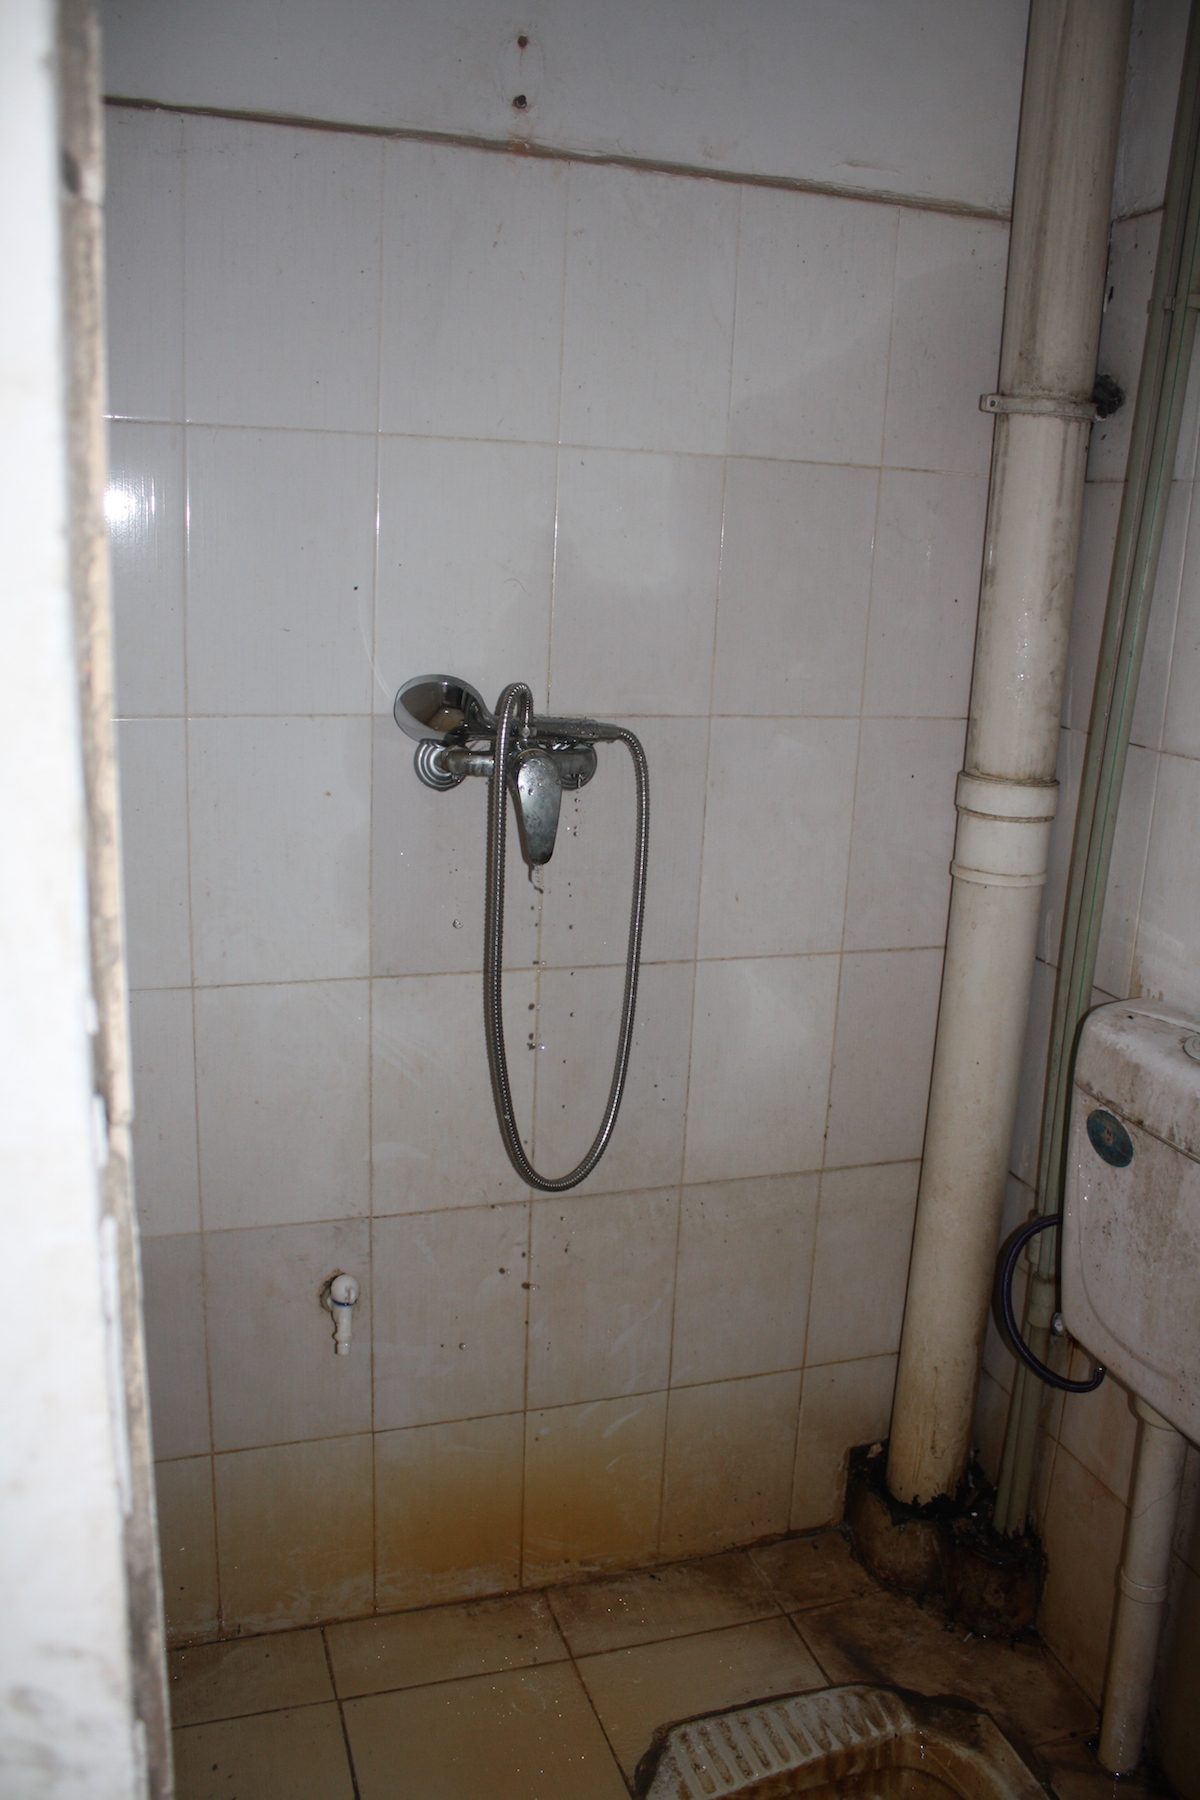 a filthy bathroom is shown with dirty walls